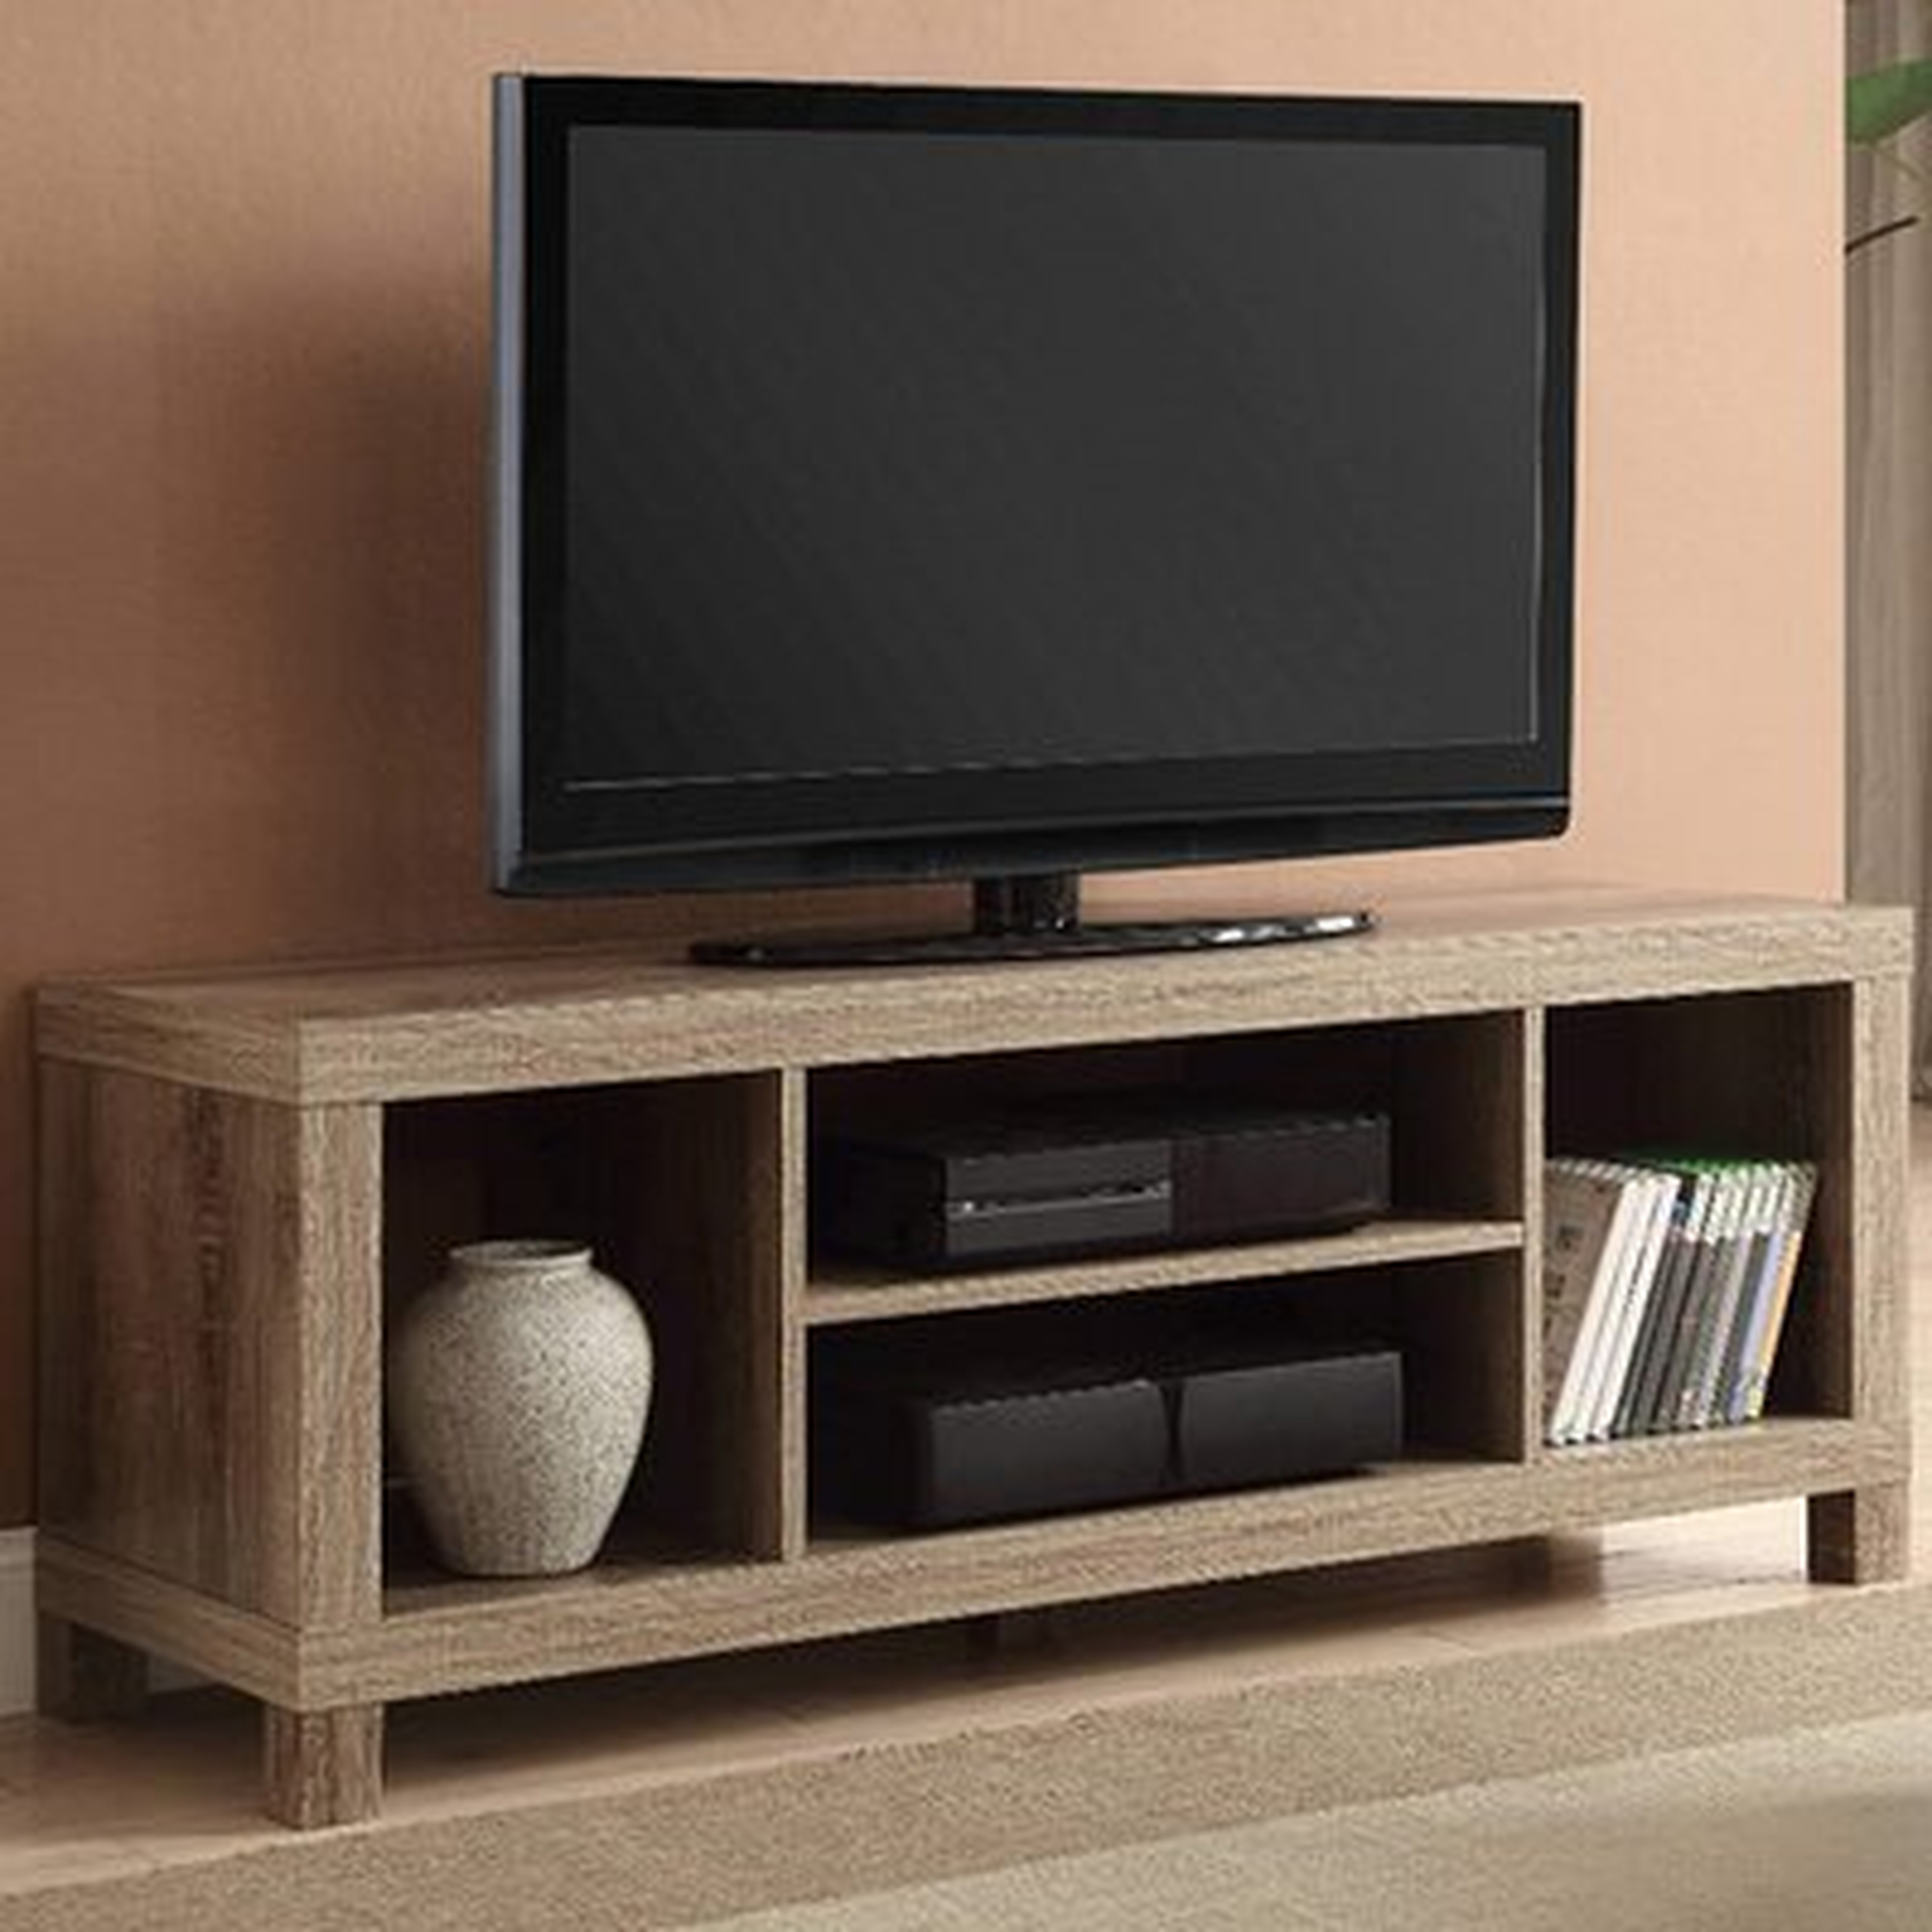 Glendive TV Stand for TVs up to 50" - Wayfair